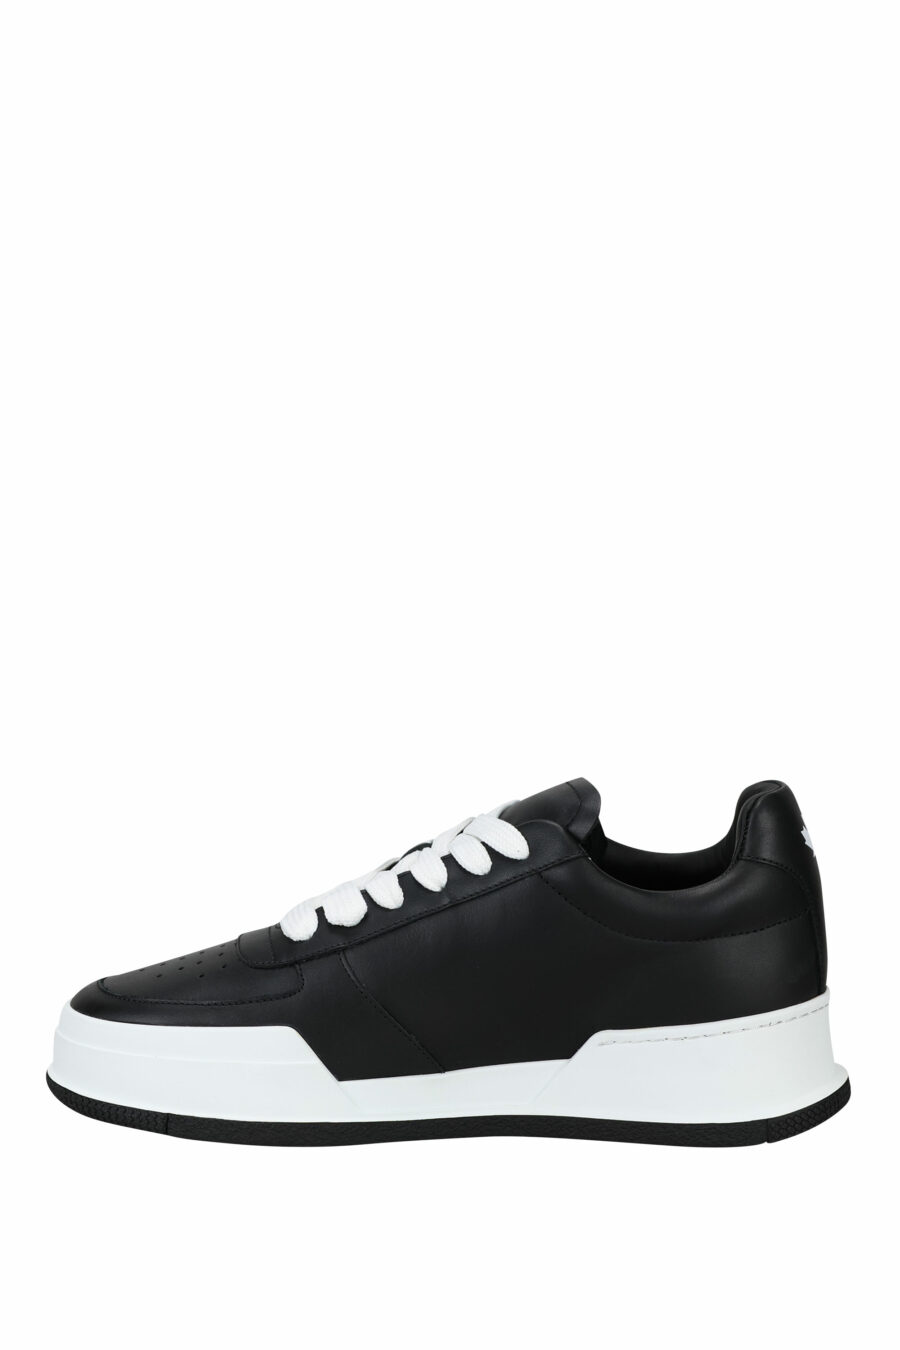 Black trainers with "icon" logo and white sole - 8055777248911 2